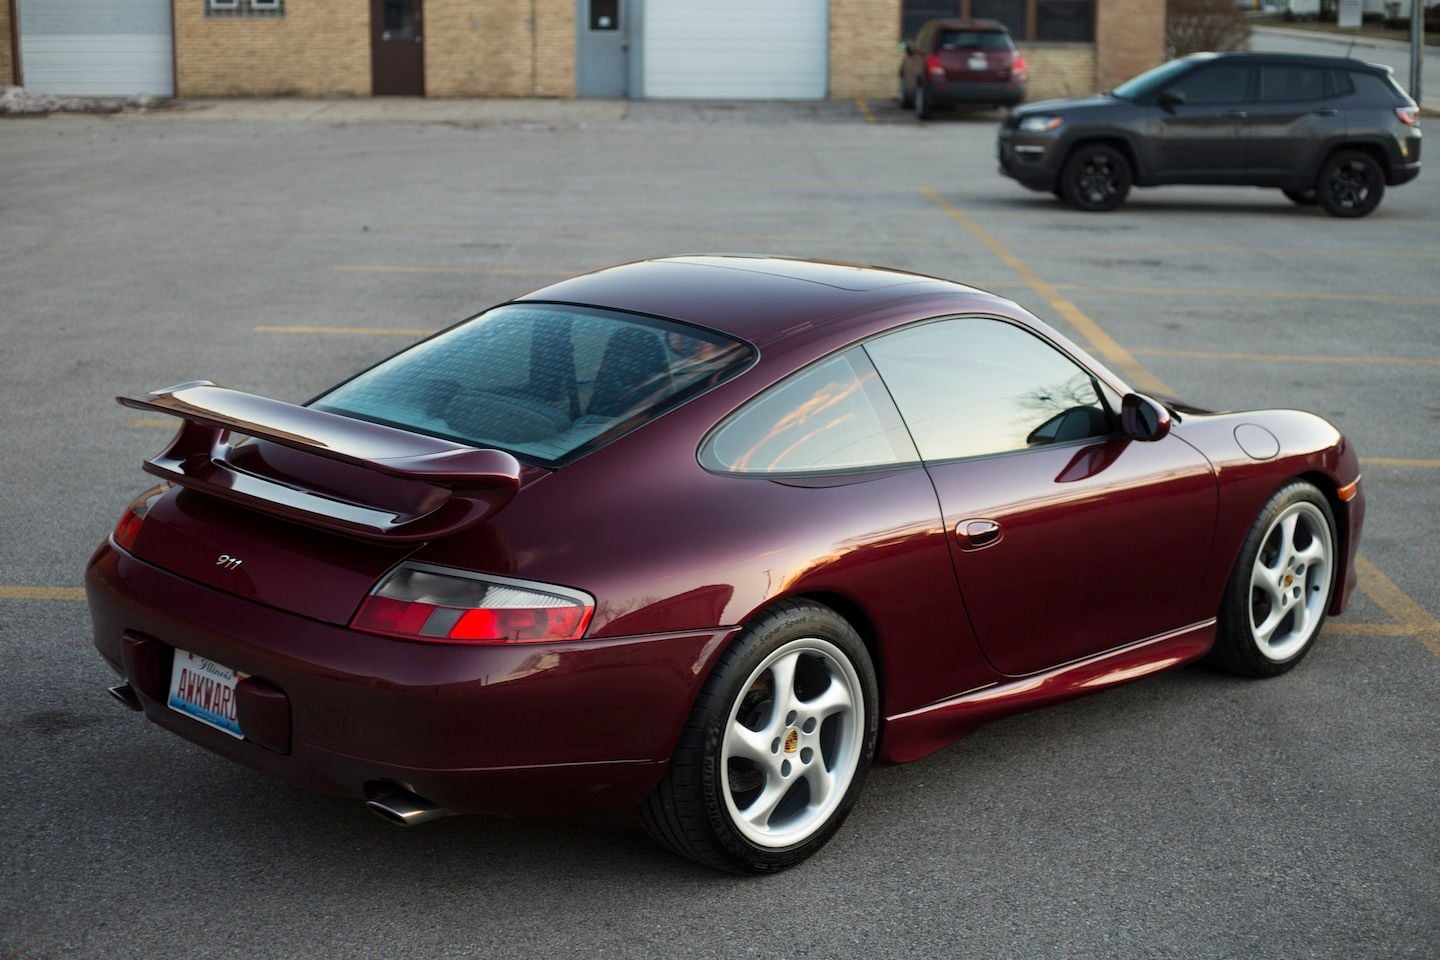 1999 Porsche 911 - 1999 Porsche 911 C2 - Aerokit - 6sp - 57k - Awesome Condition - Used - VIN WP0AA2996XS622101 - 56,800 Miles - 6 cyl - 2WD - Manual - Coupe - Other - Chicago, IL 60647, United States